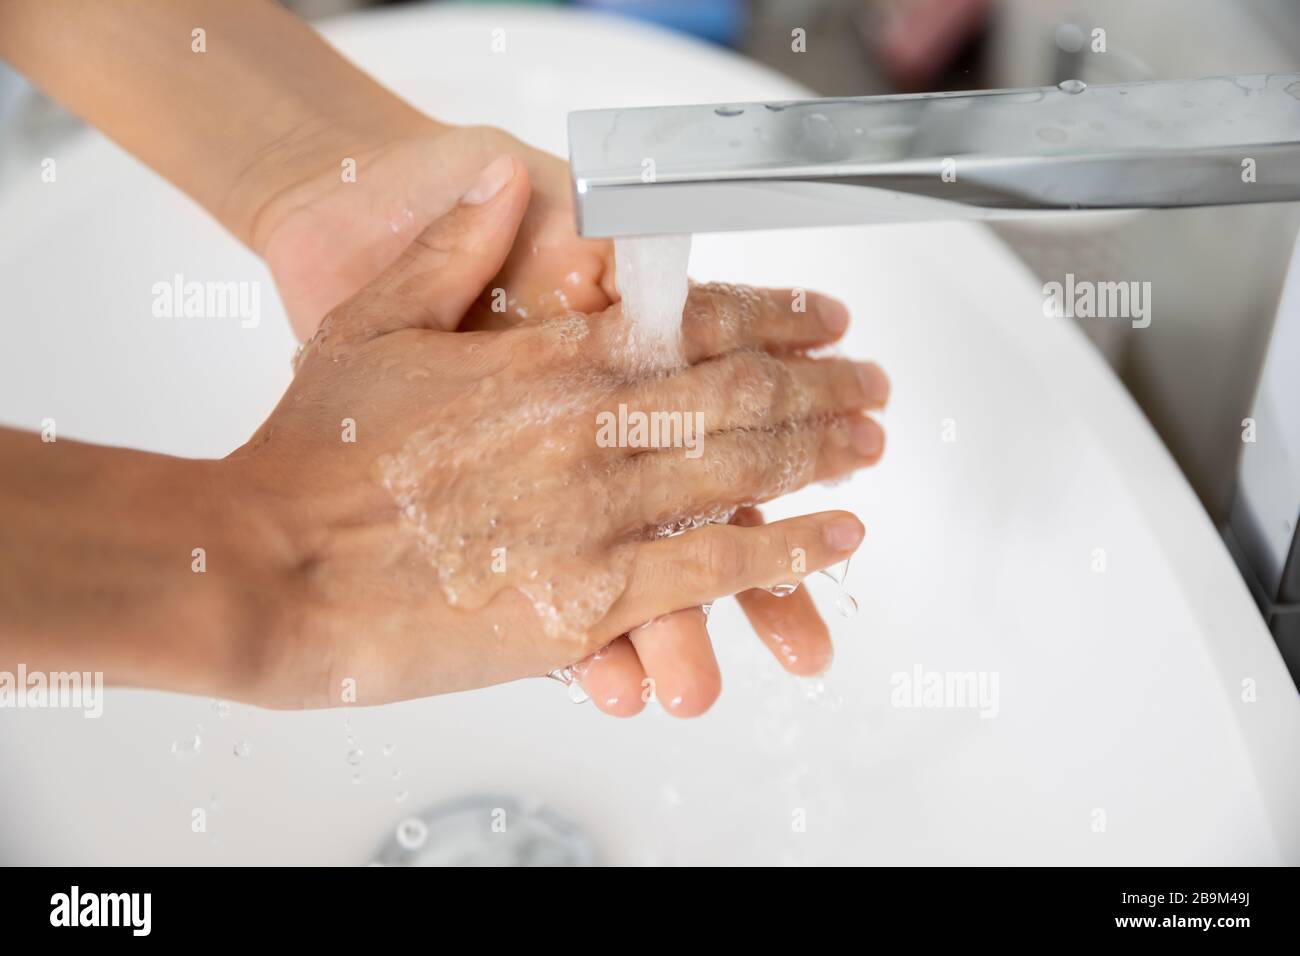 Closeup view caucasian woman cleans hands under running water Stock Photo